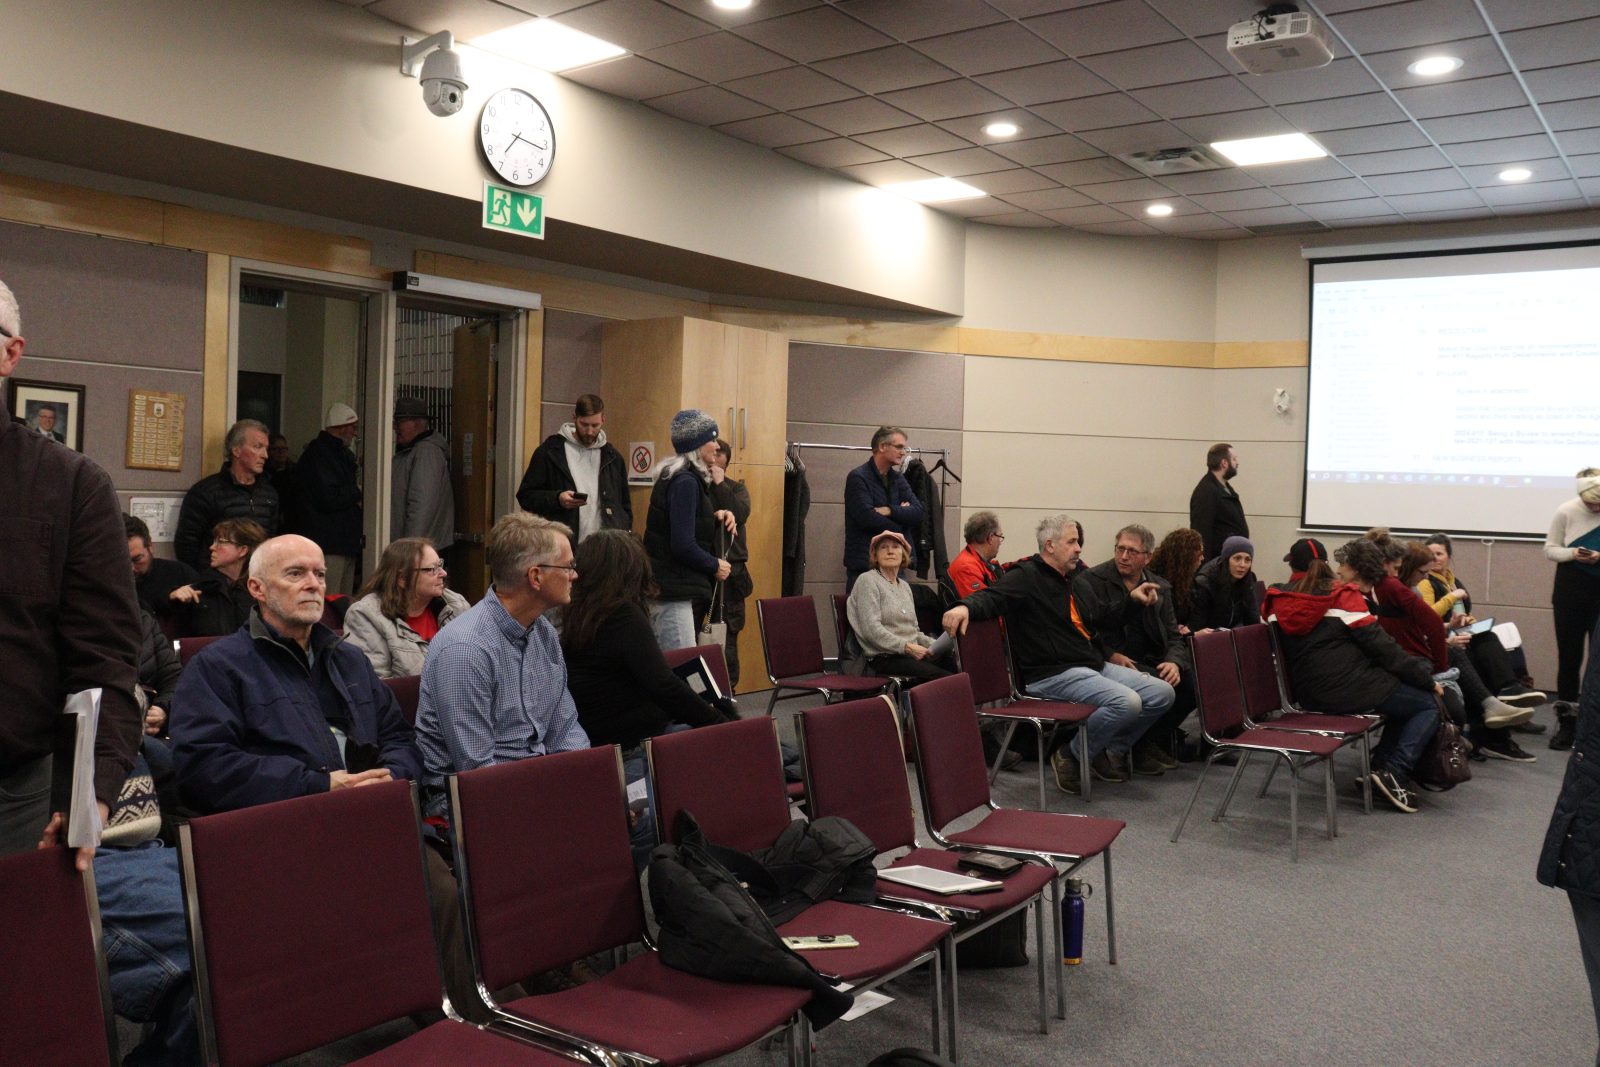 Residents show up in support of Russell question period